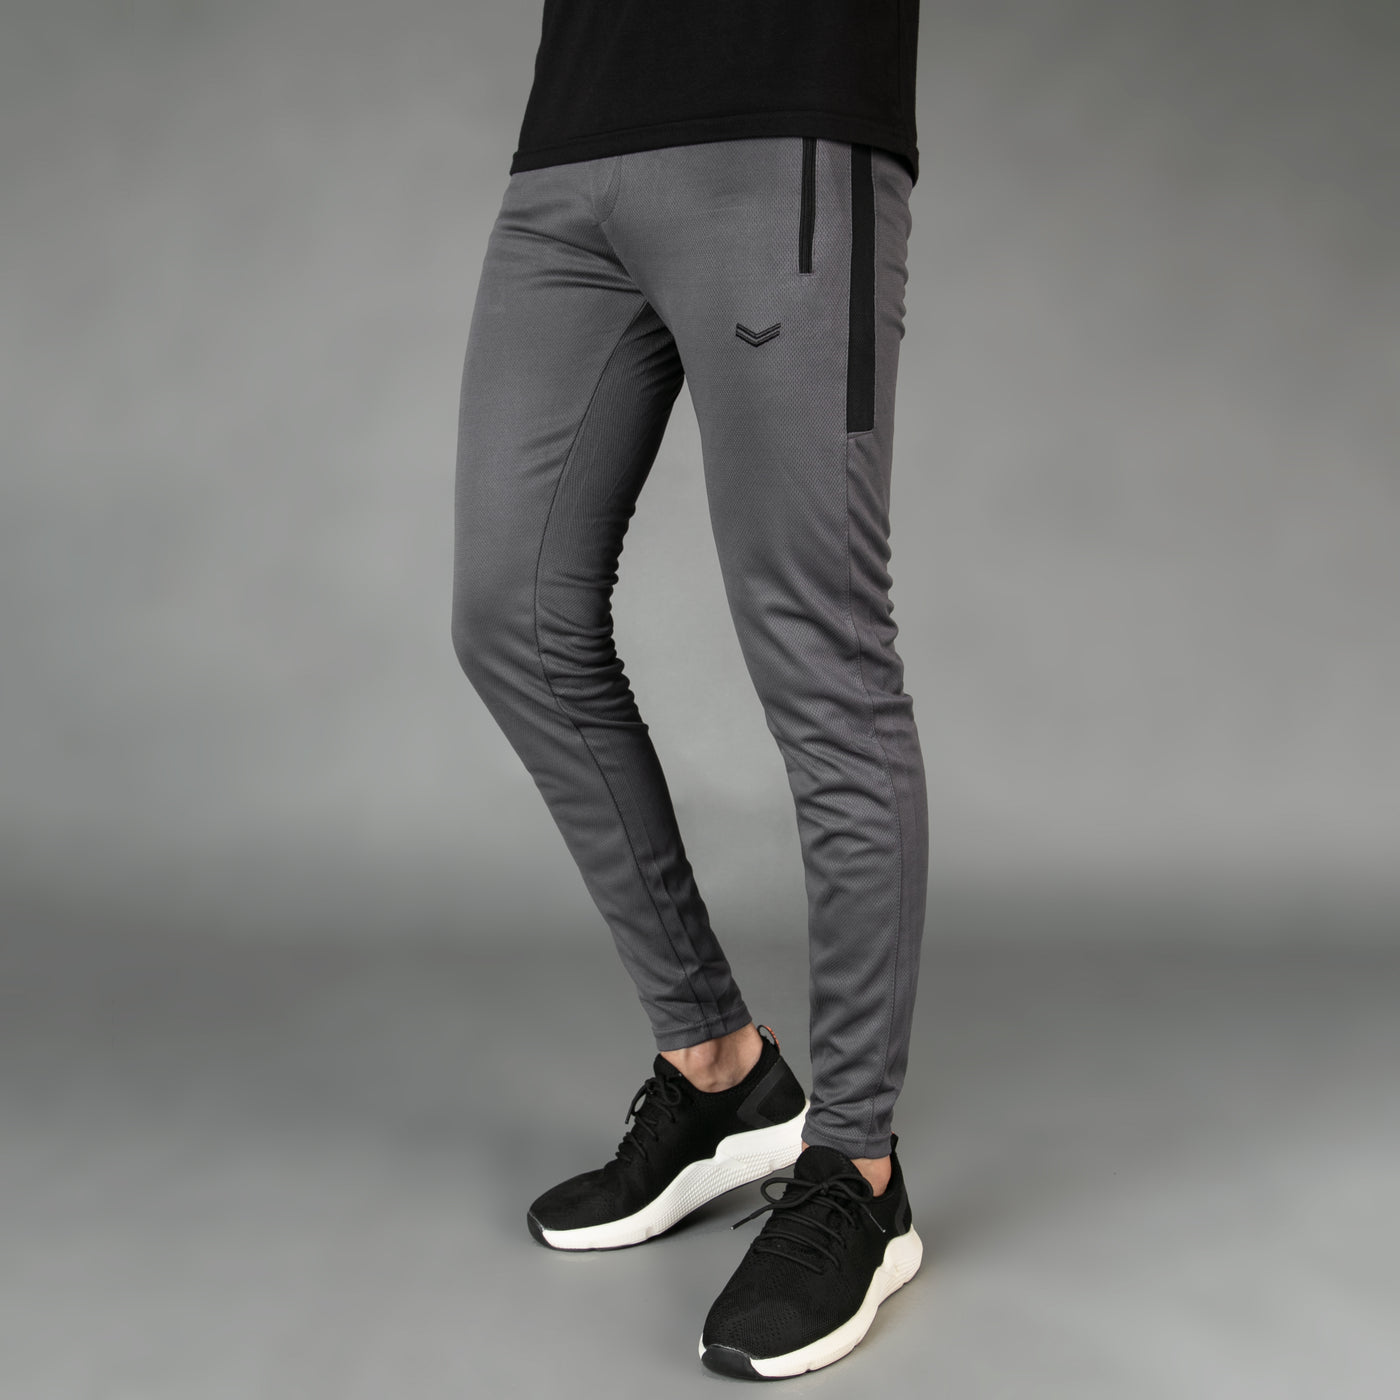 Smoke Gray with Black Panel Breathable Mesh Quick Dry Bottoms